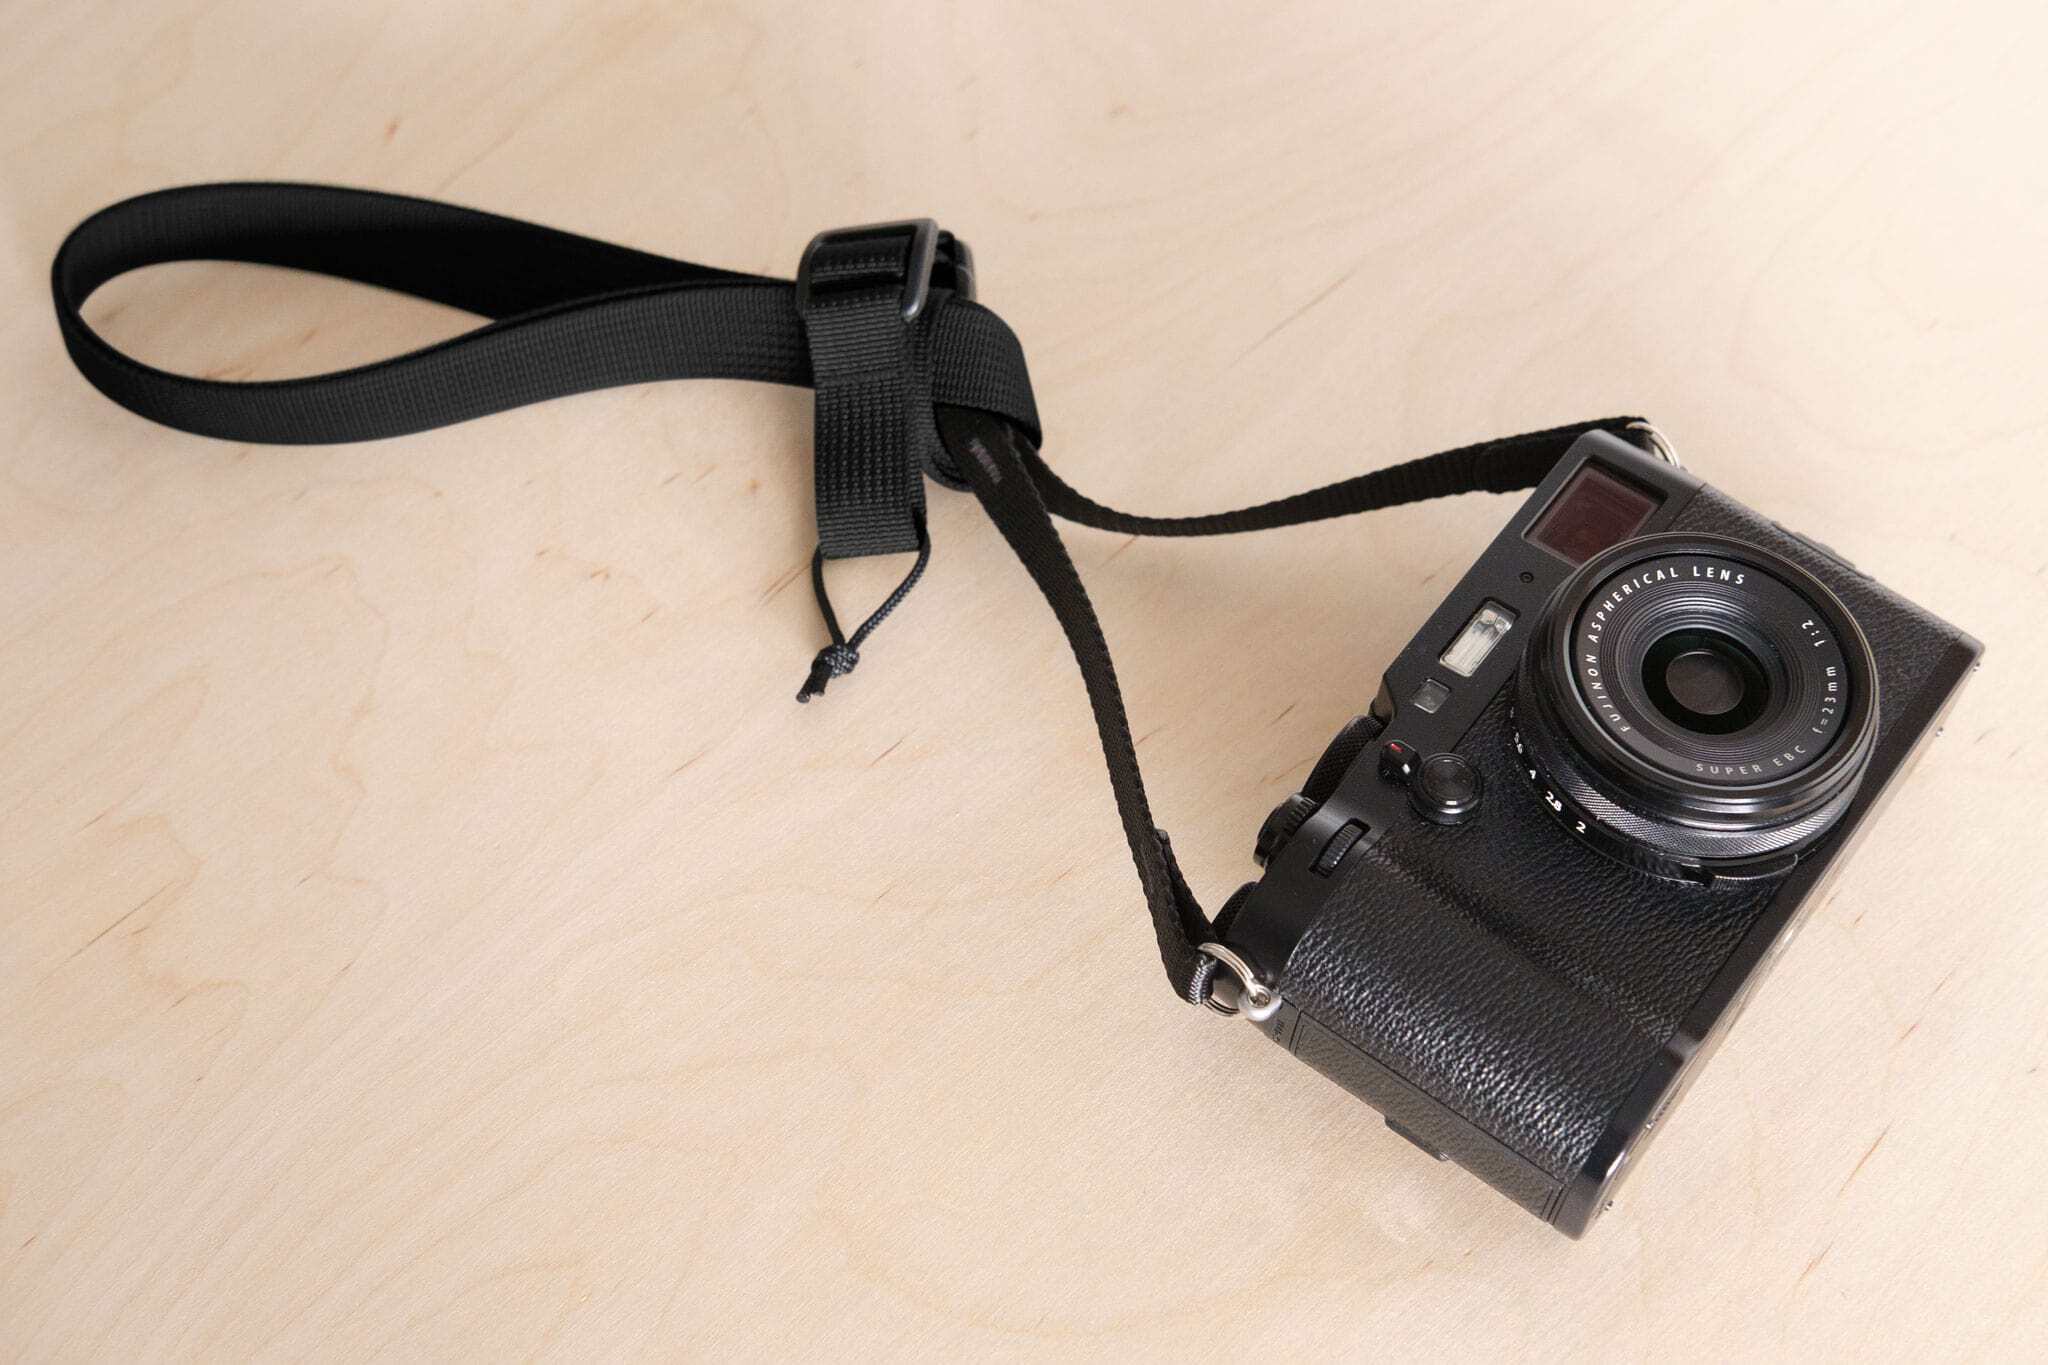 Convert your F1ultralight to a short wrist strap by tying it in a knot.